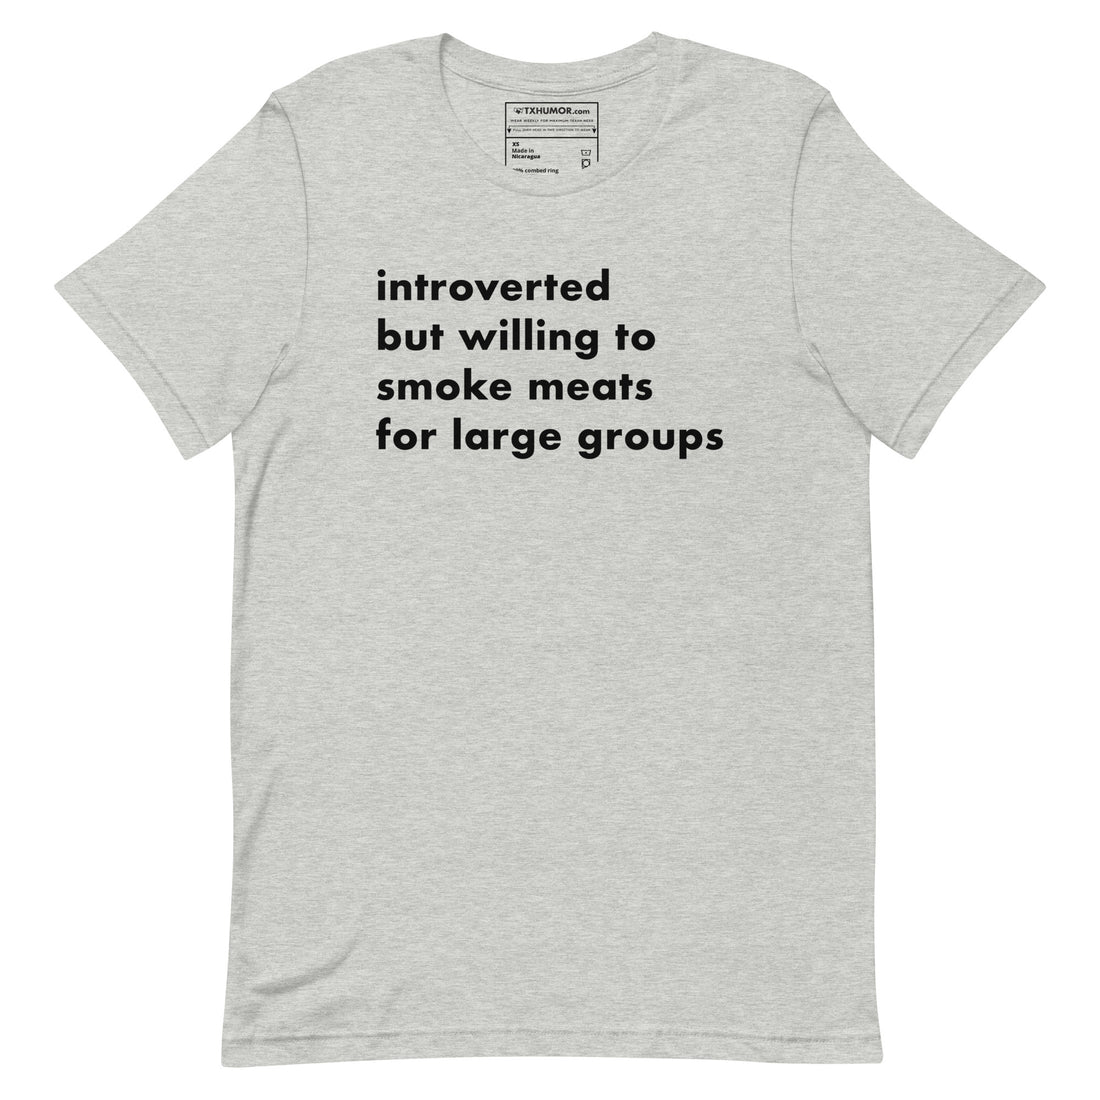 Introverted but willing to smoke meats T-Shirt